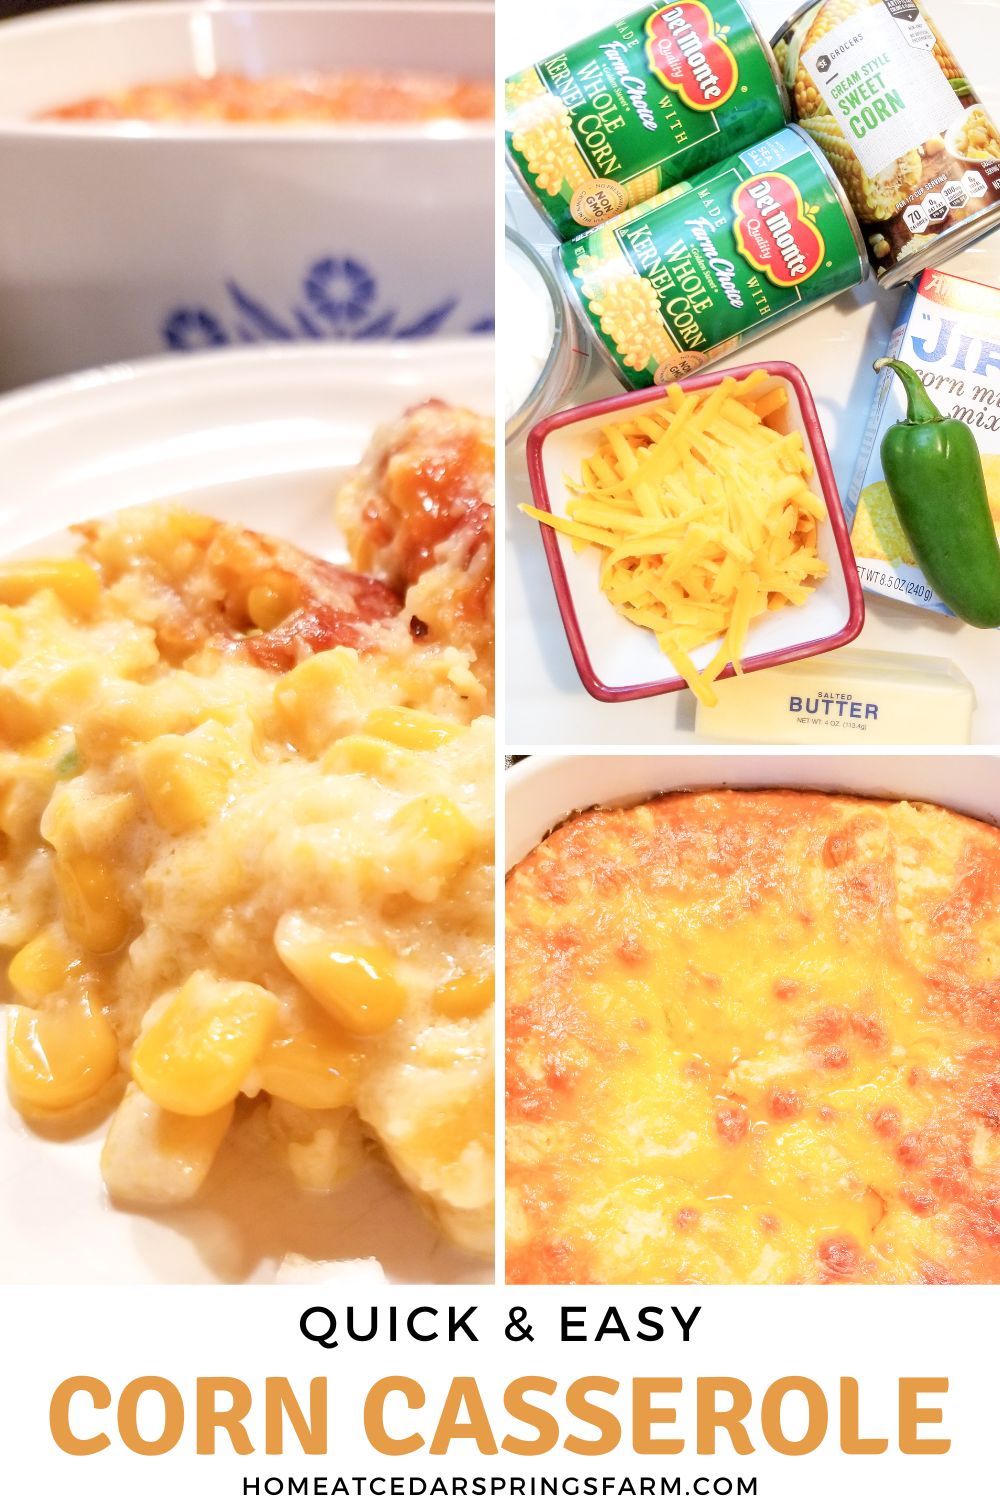 pictures of corn casserole with text overlay